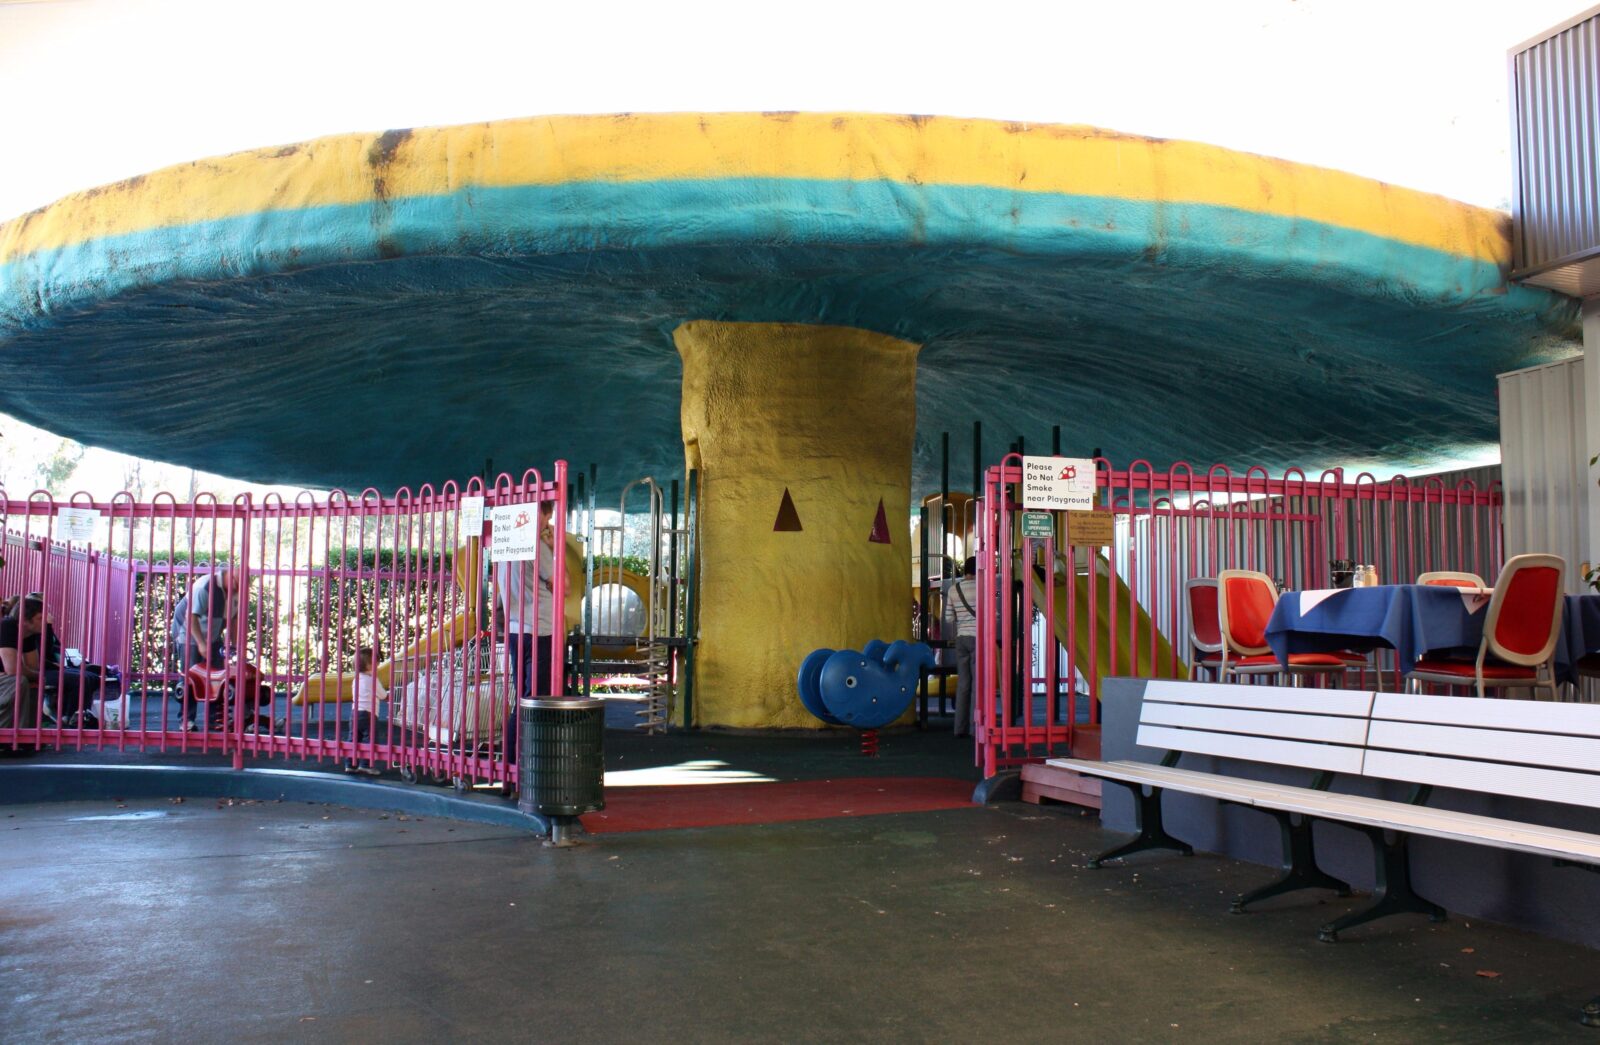 The Giant Mushroom Playground at Belconnen Fresh Food Markets